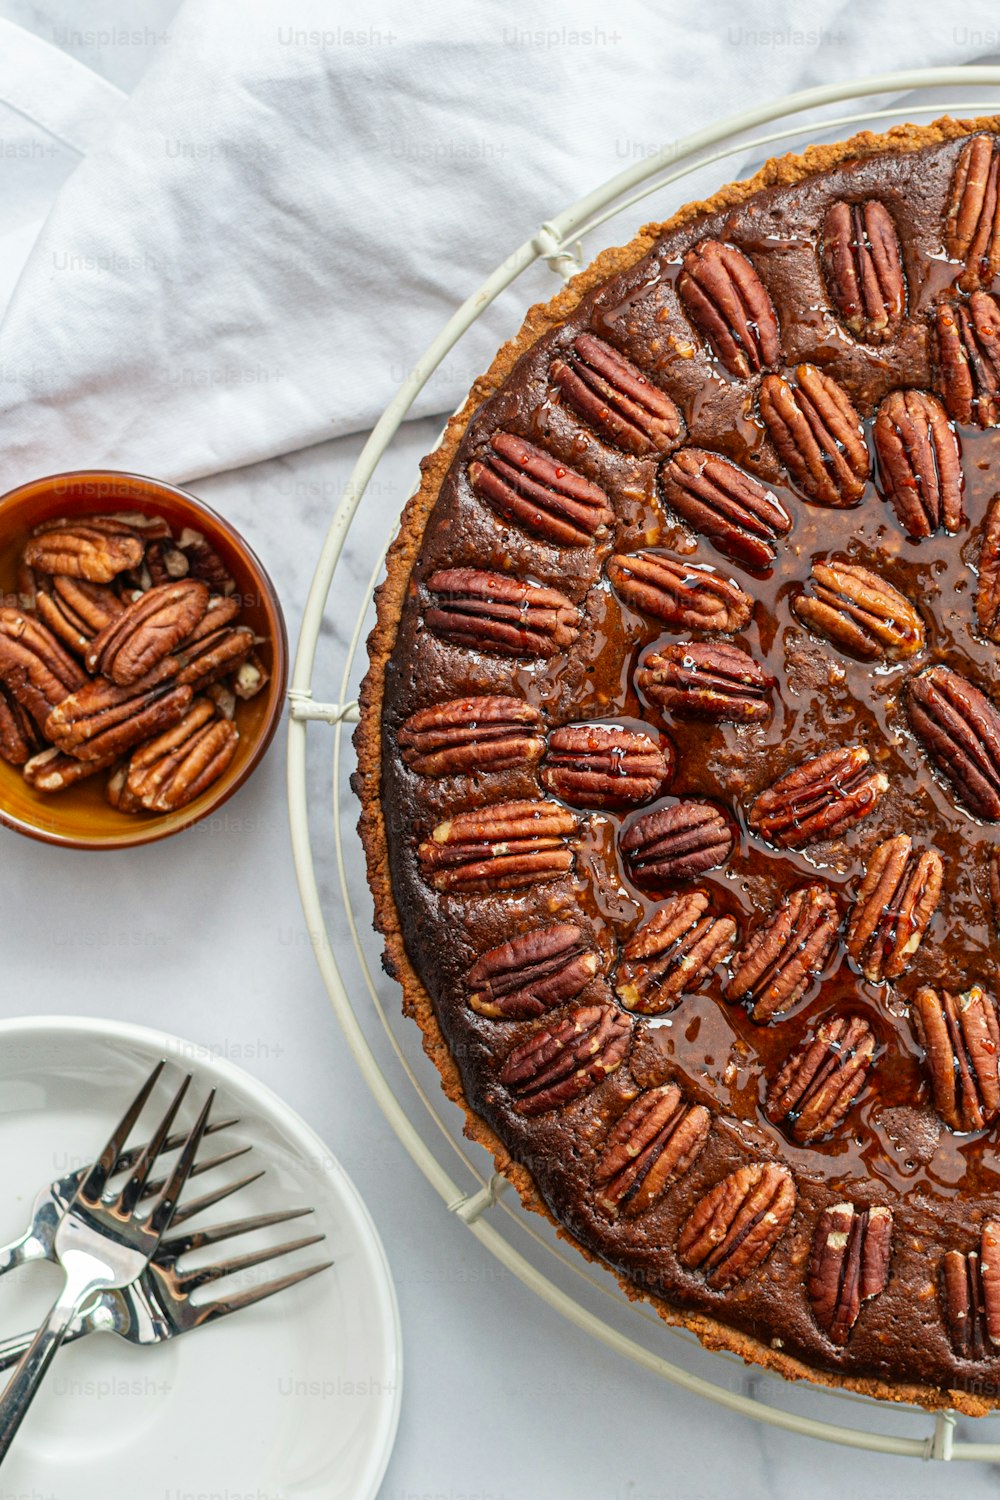 a chocolate pie with pecans on top of it